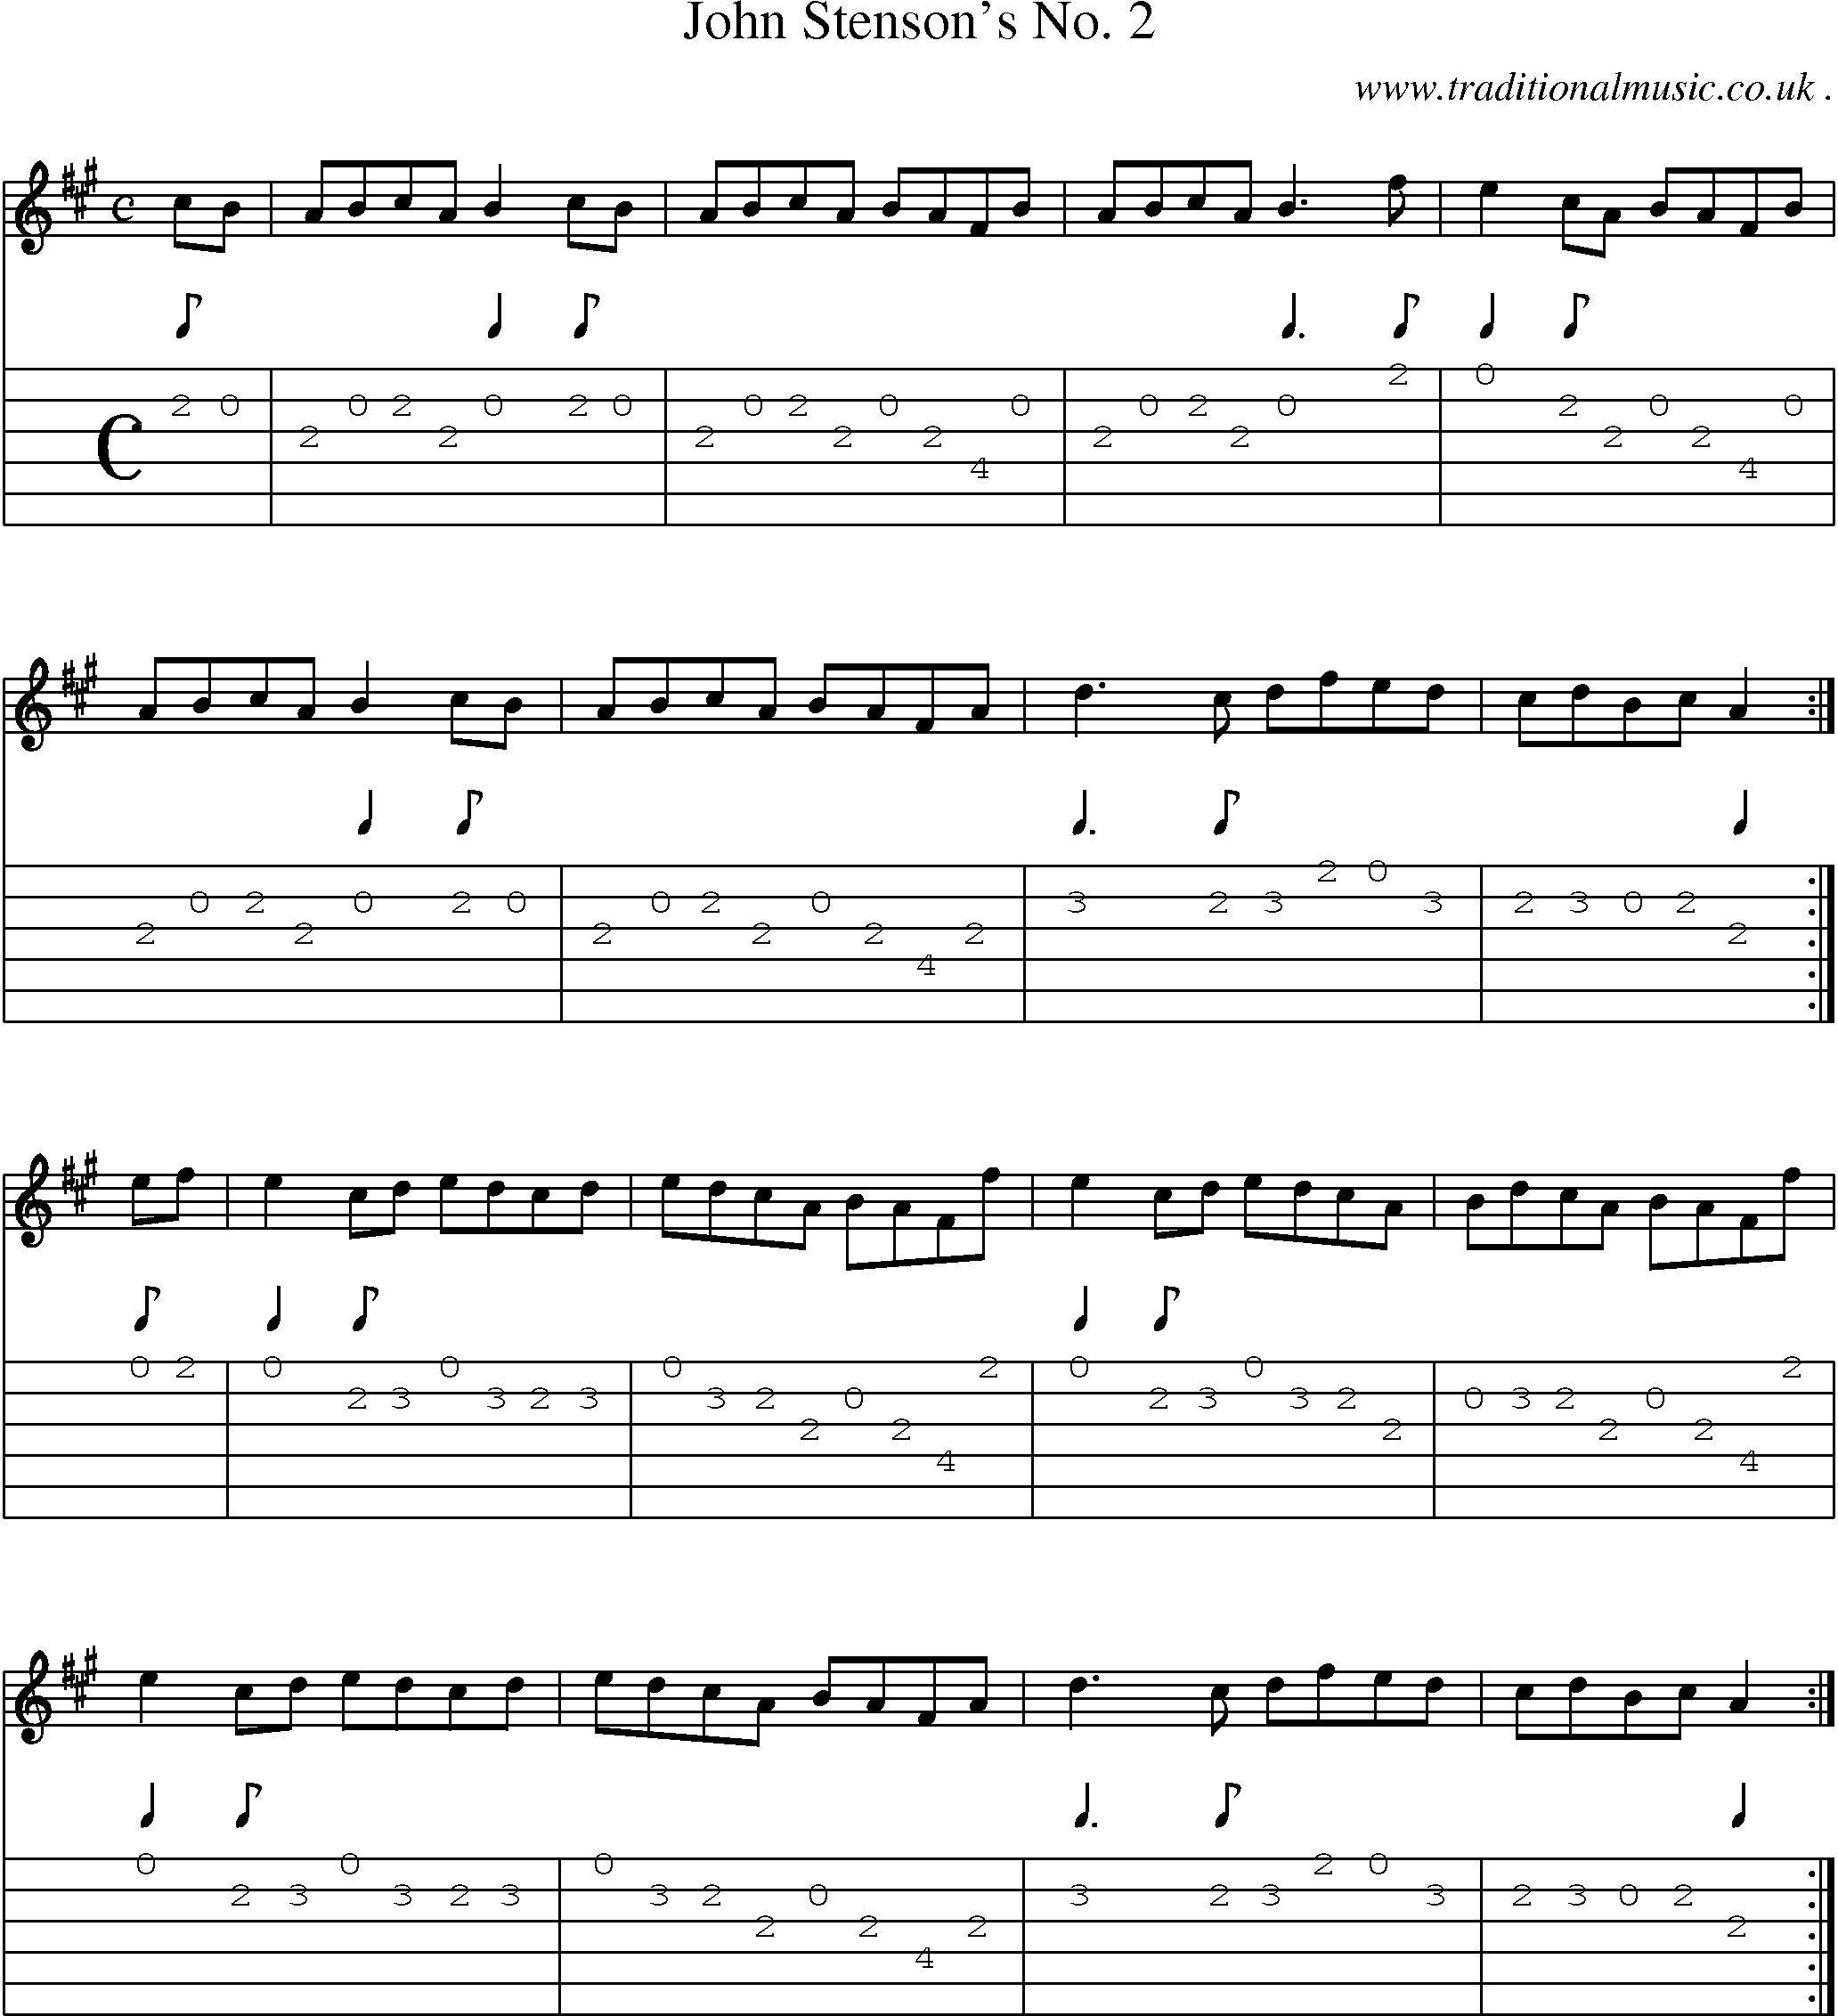 Sheet-Music and Guitar Tabs for John Stensons No 2